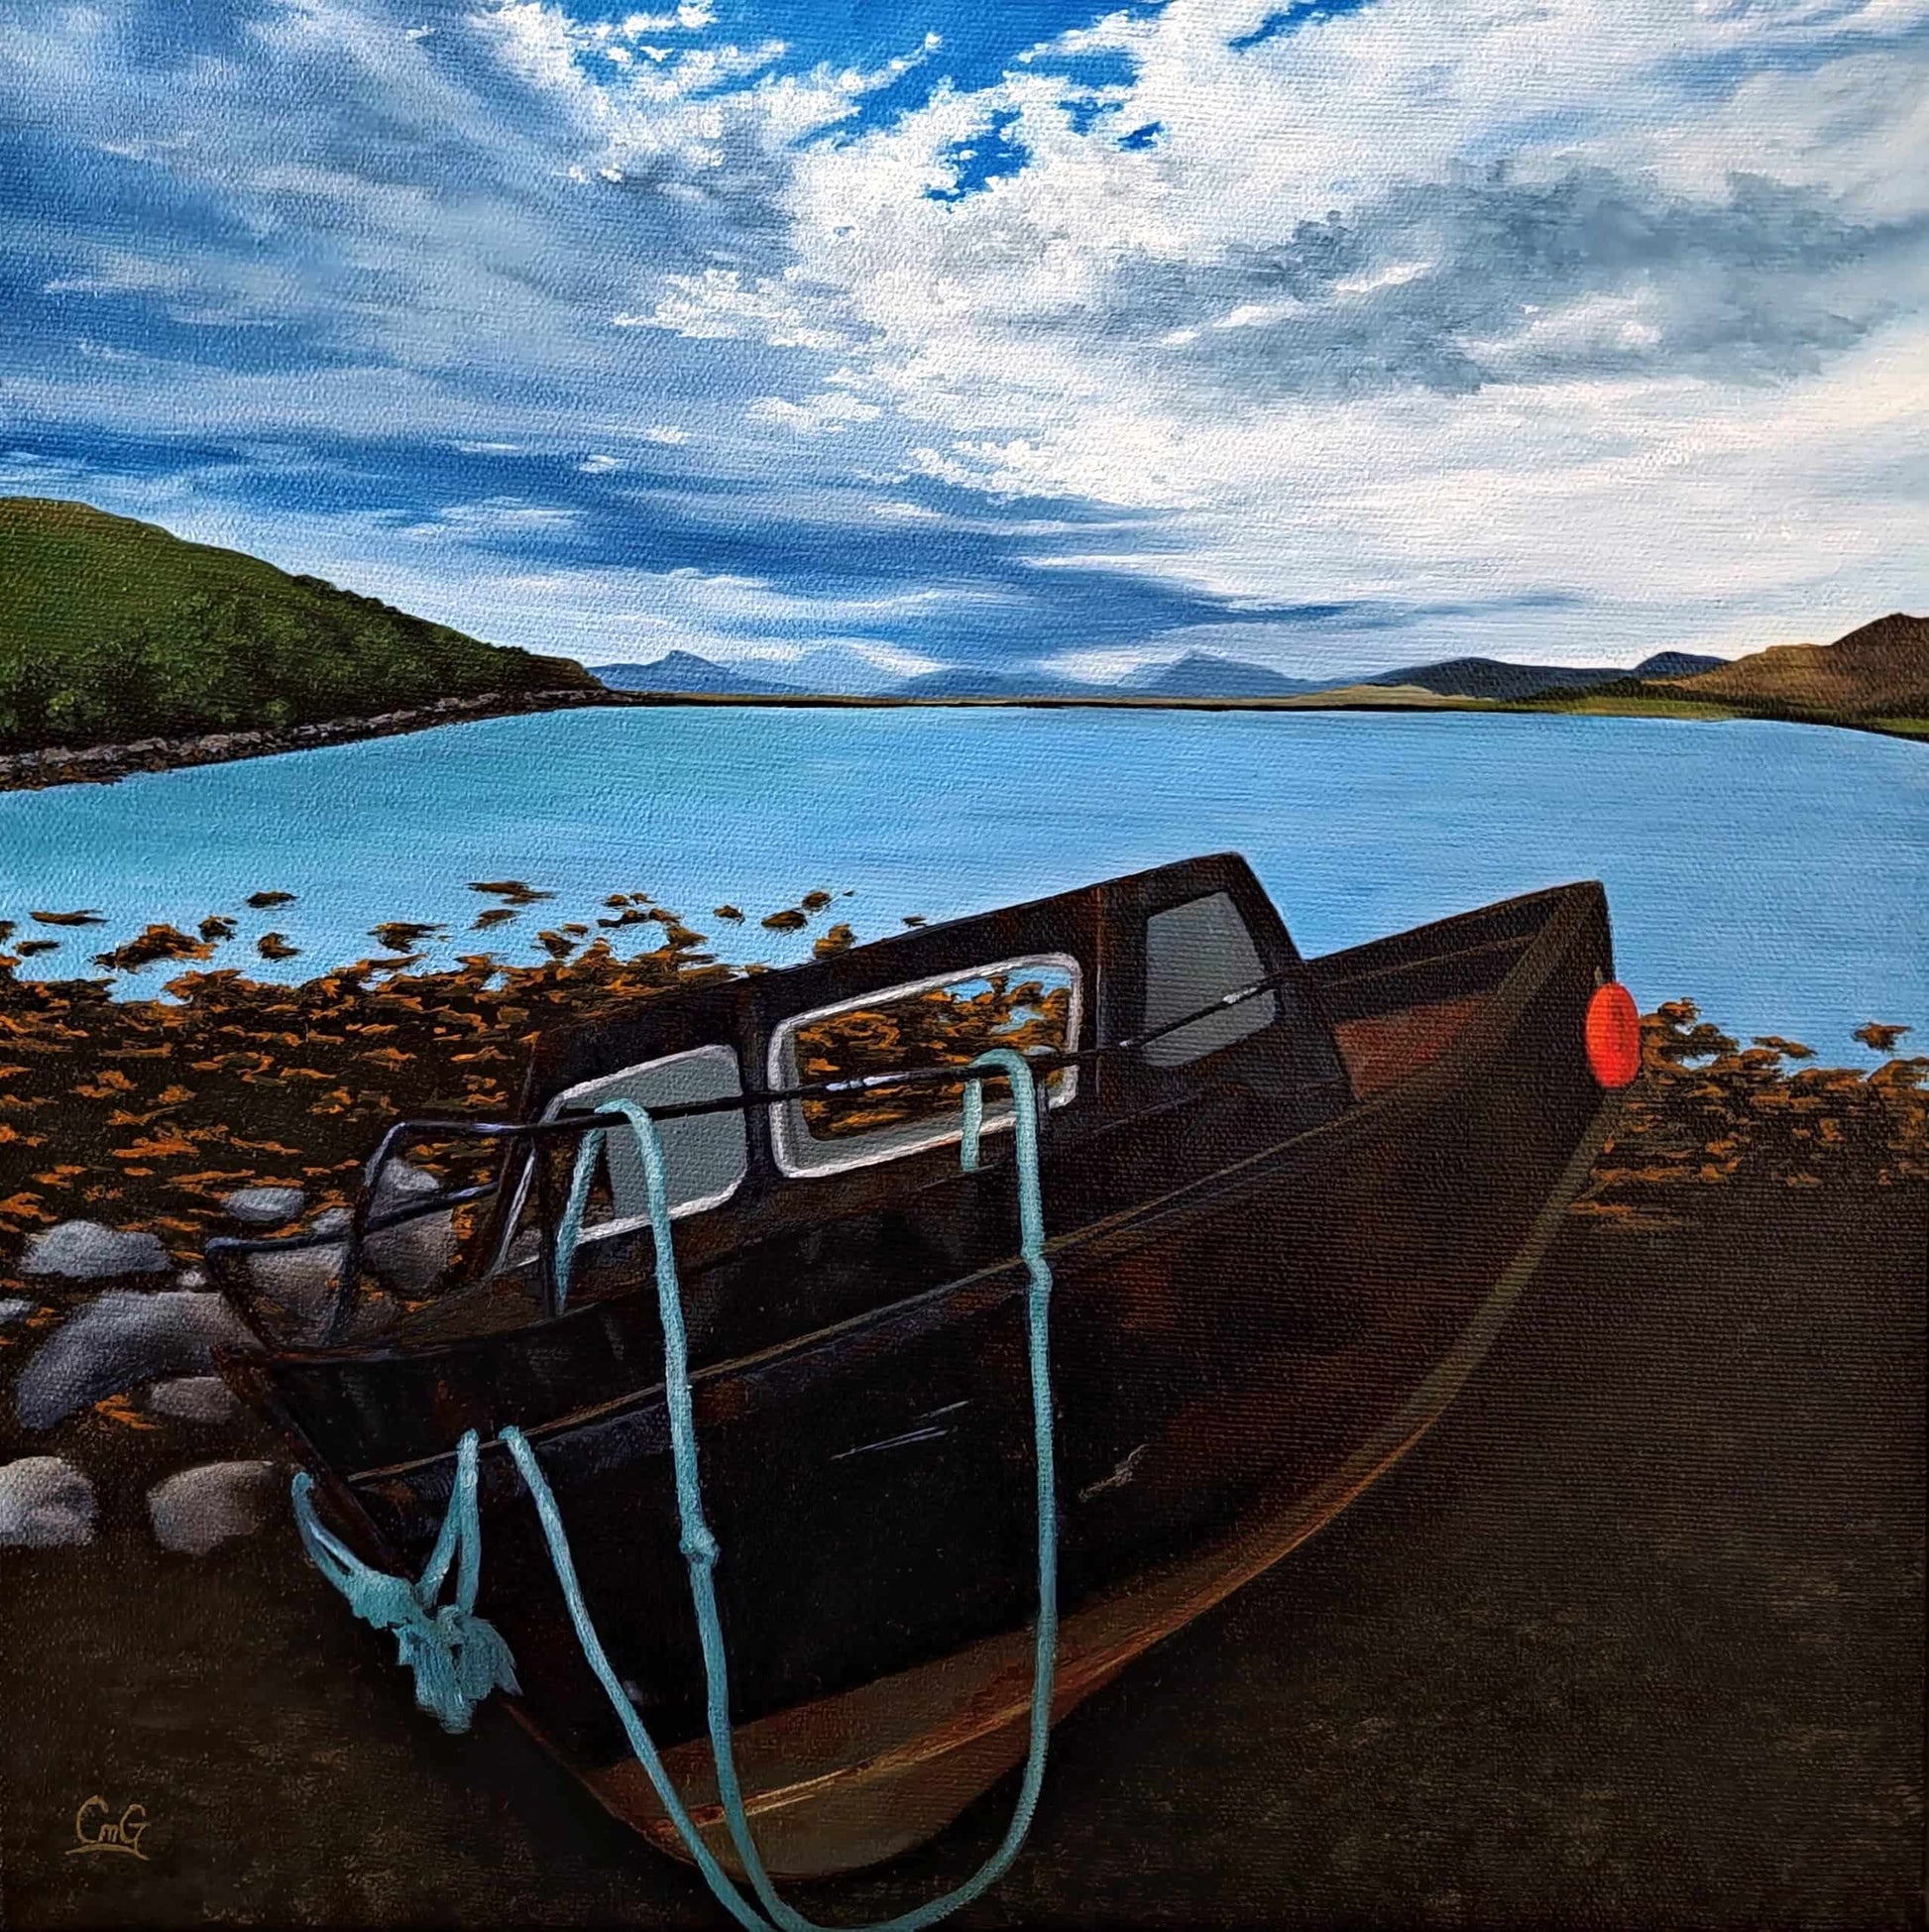 Christina Gouldsborough Canadian Landscape Artist - Beached - An original oil landscape painting of a boat beached on low tide, with a dramatic display of clouds in the sky.